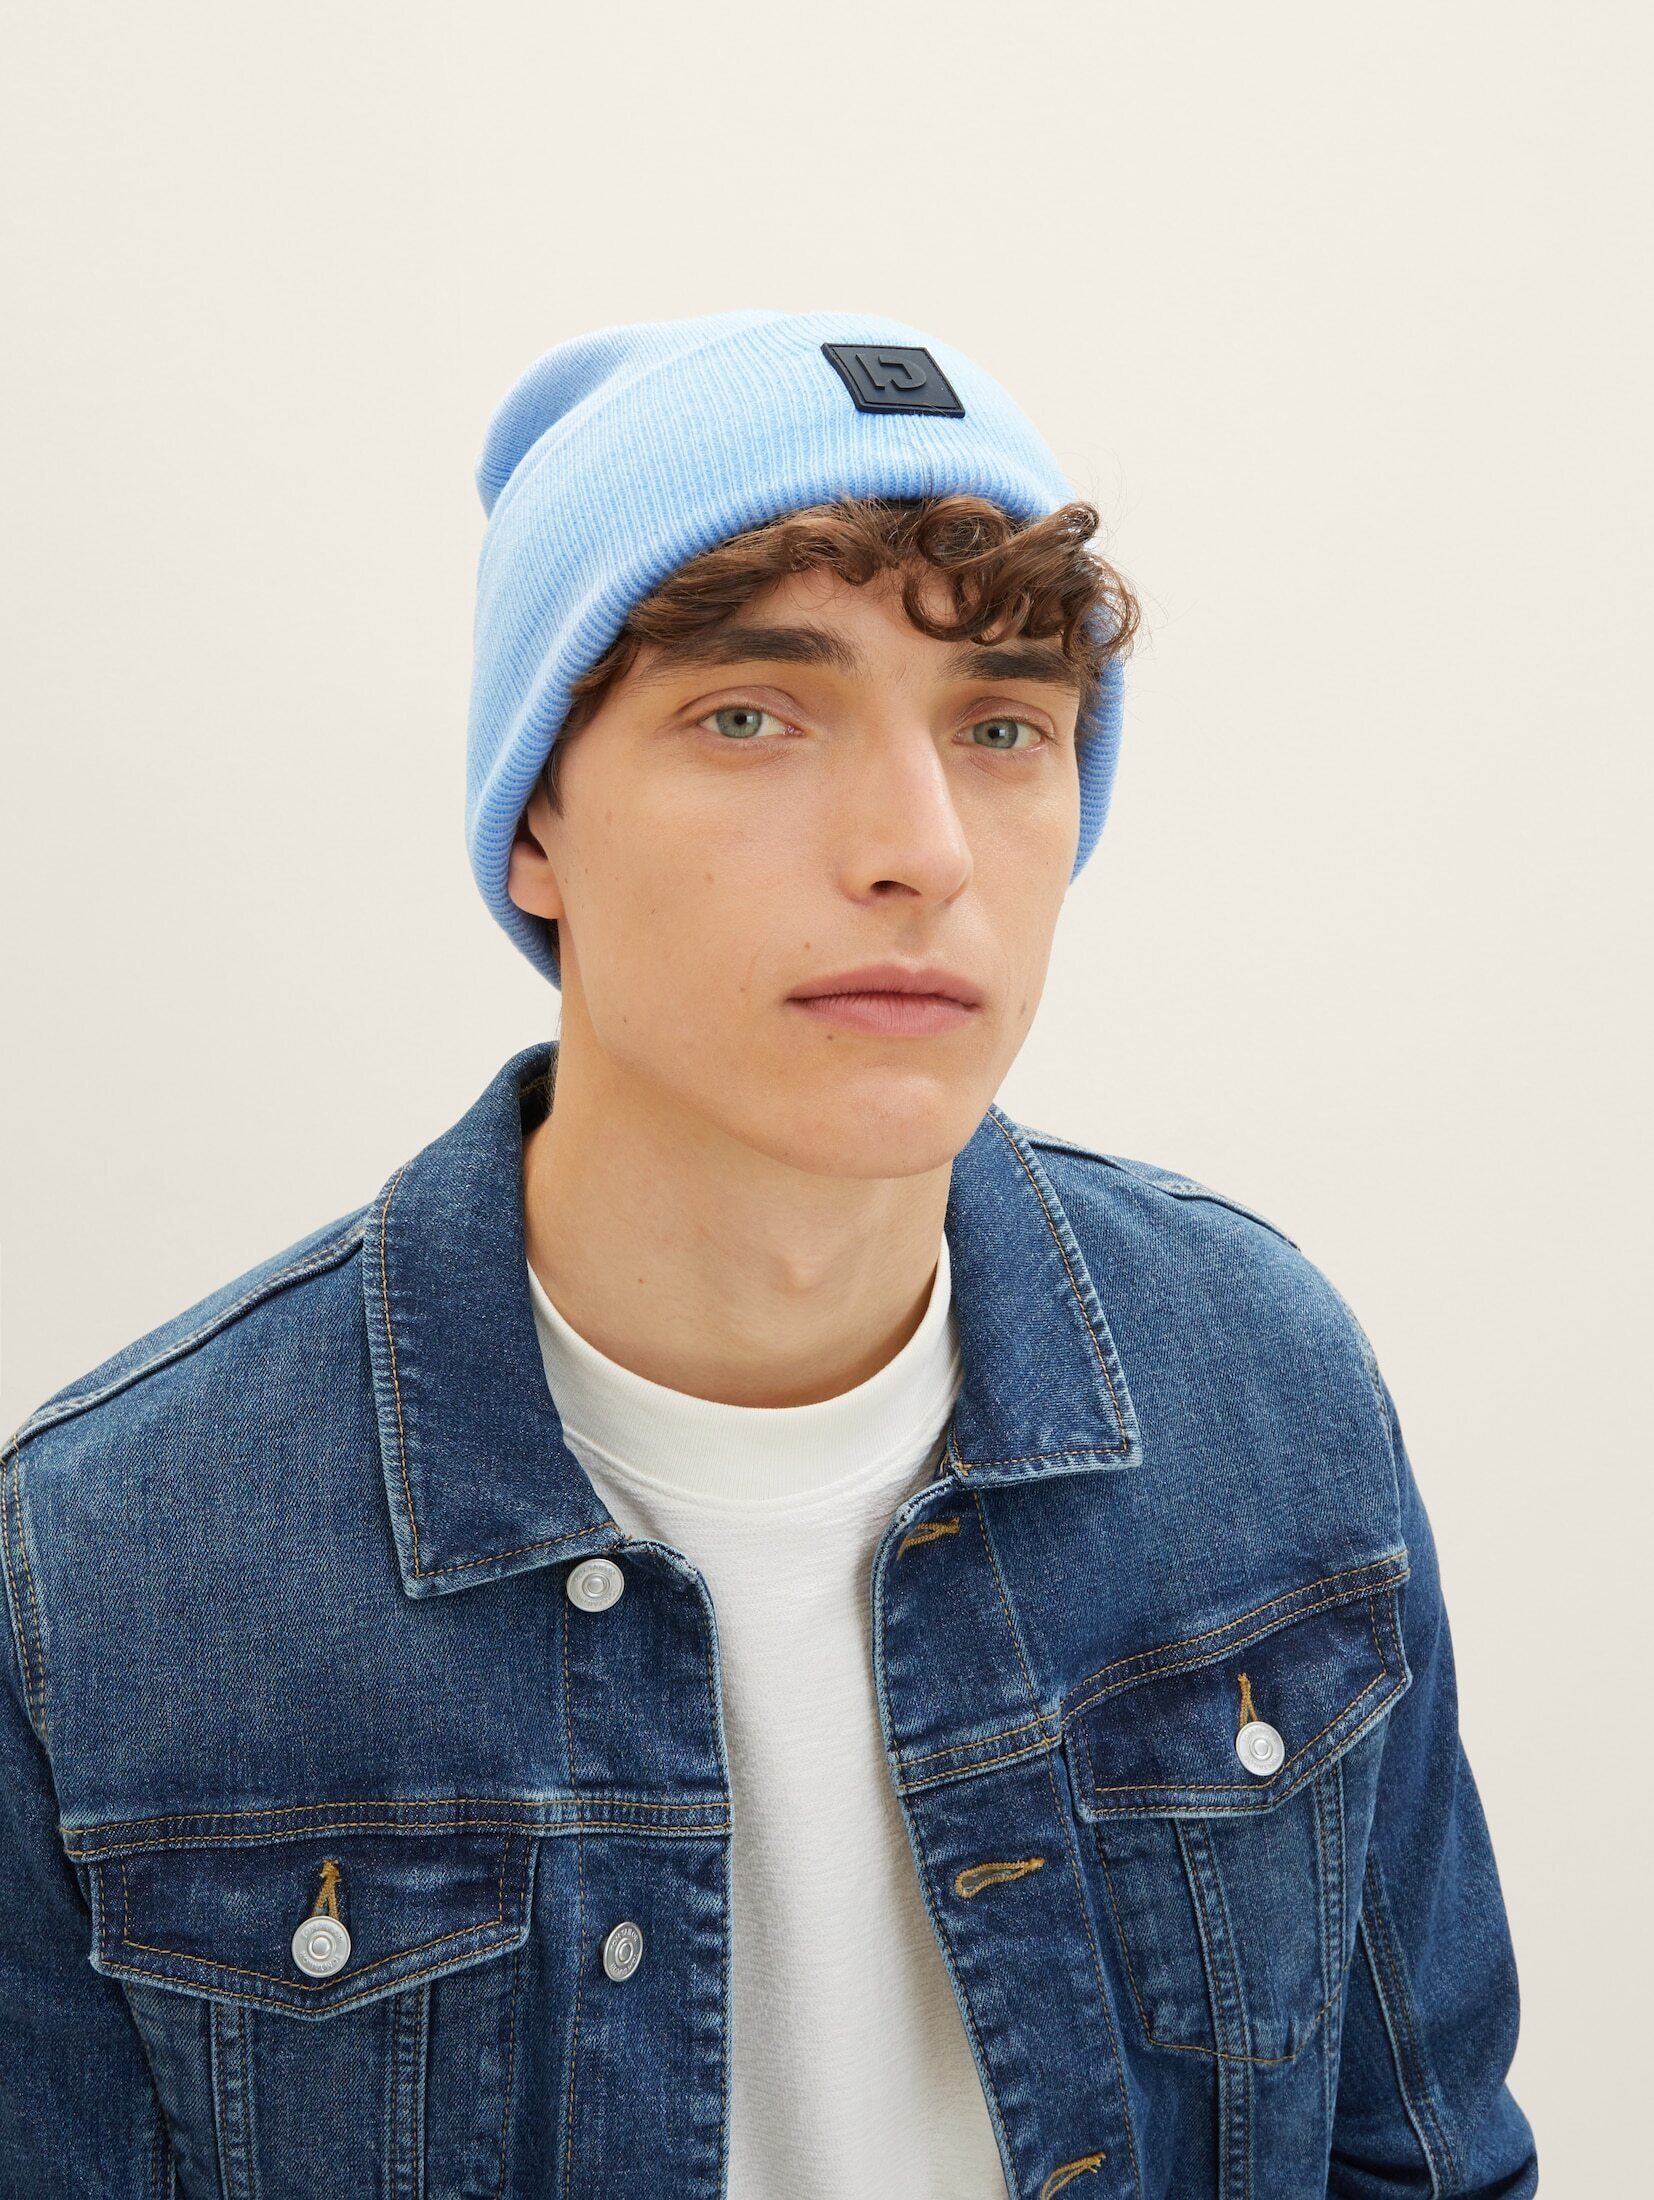 TOM TAILOR Denim Beanie Basic out mit washed Beanie middle recyceltem Polyacrylic blue